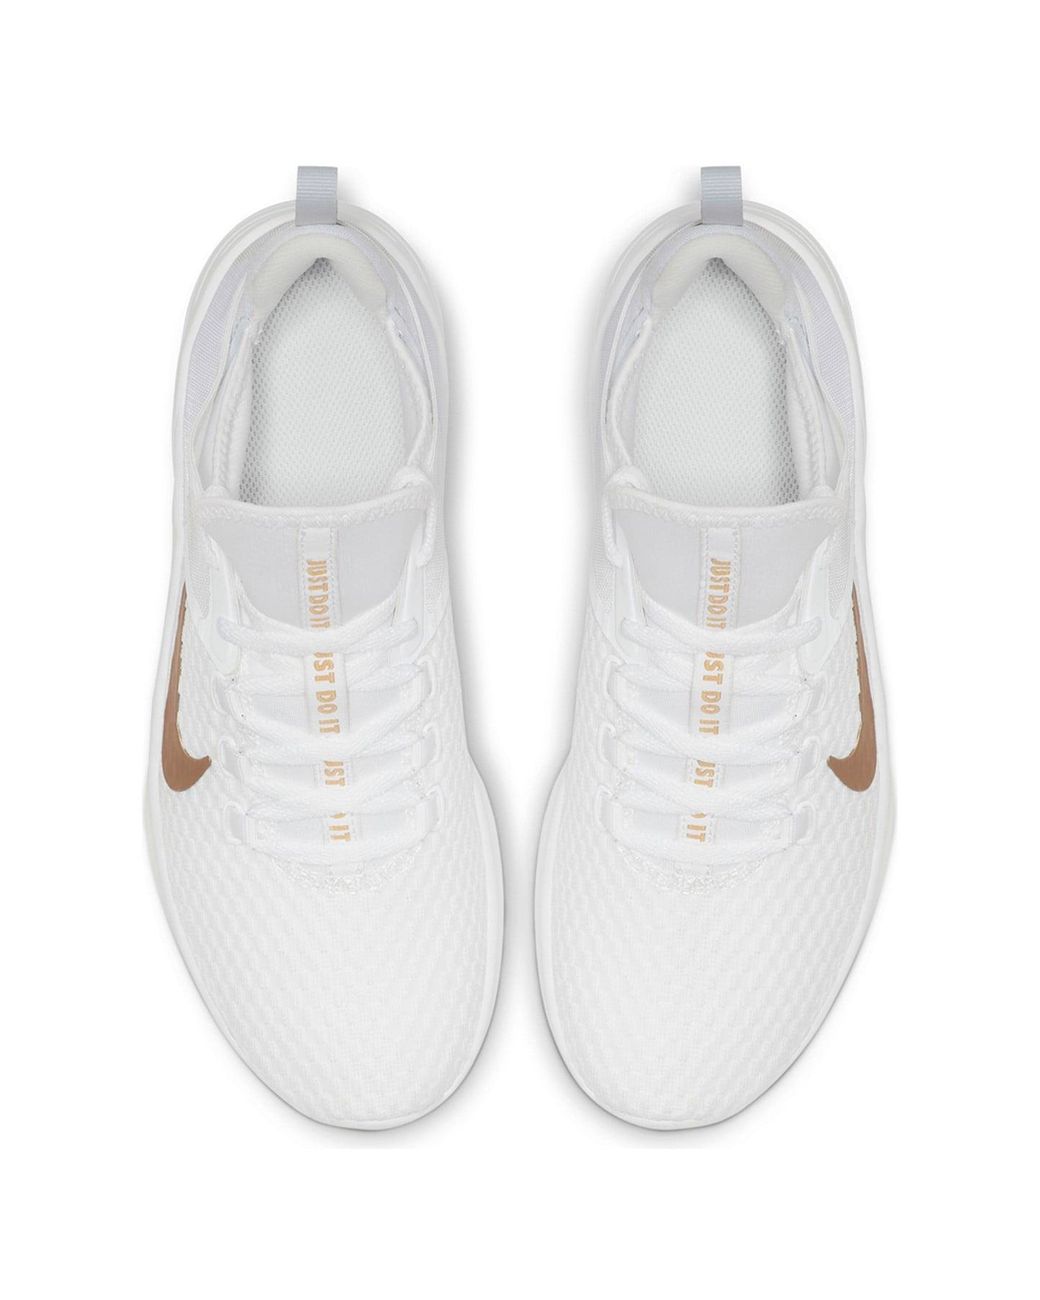 Nike Synthetic Air Max Bella Tr 2 Training Shoe in White/Metallic Gold  (White) | Lyst